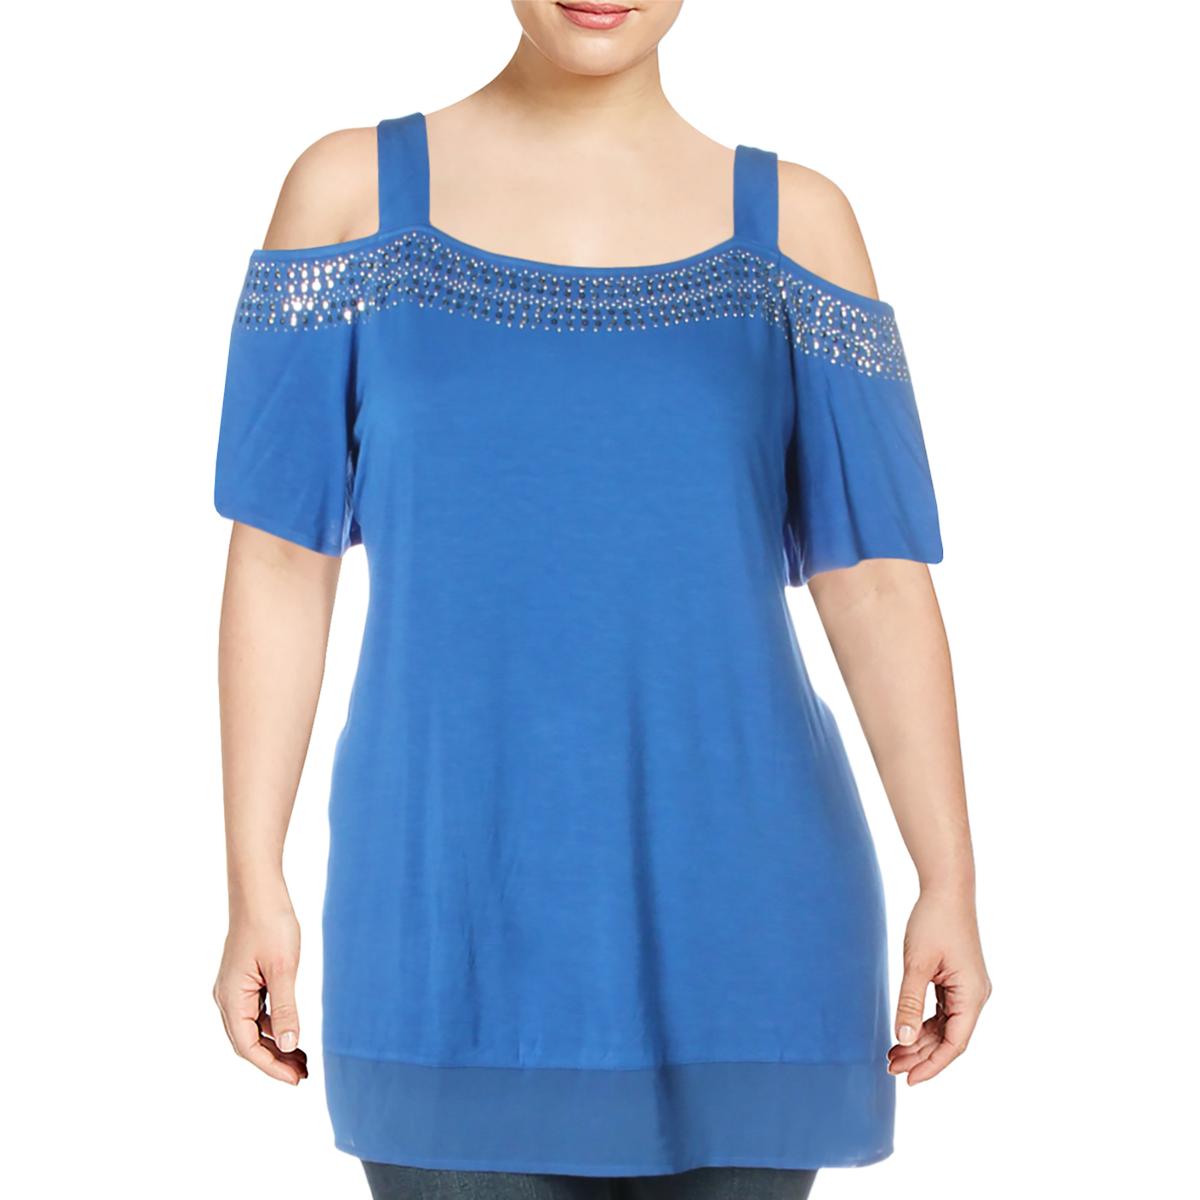 Belldini Womens Blue Embellished Pullover Top Blouse Plus 3X BHFO 4901 ...